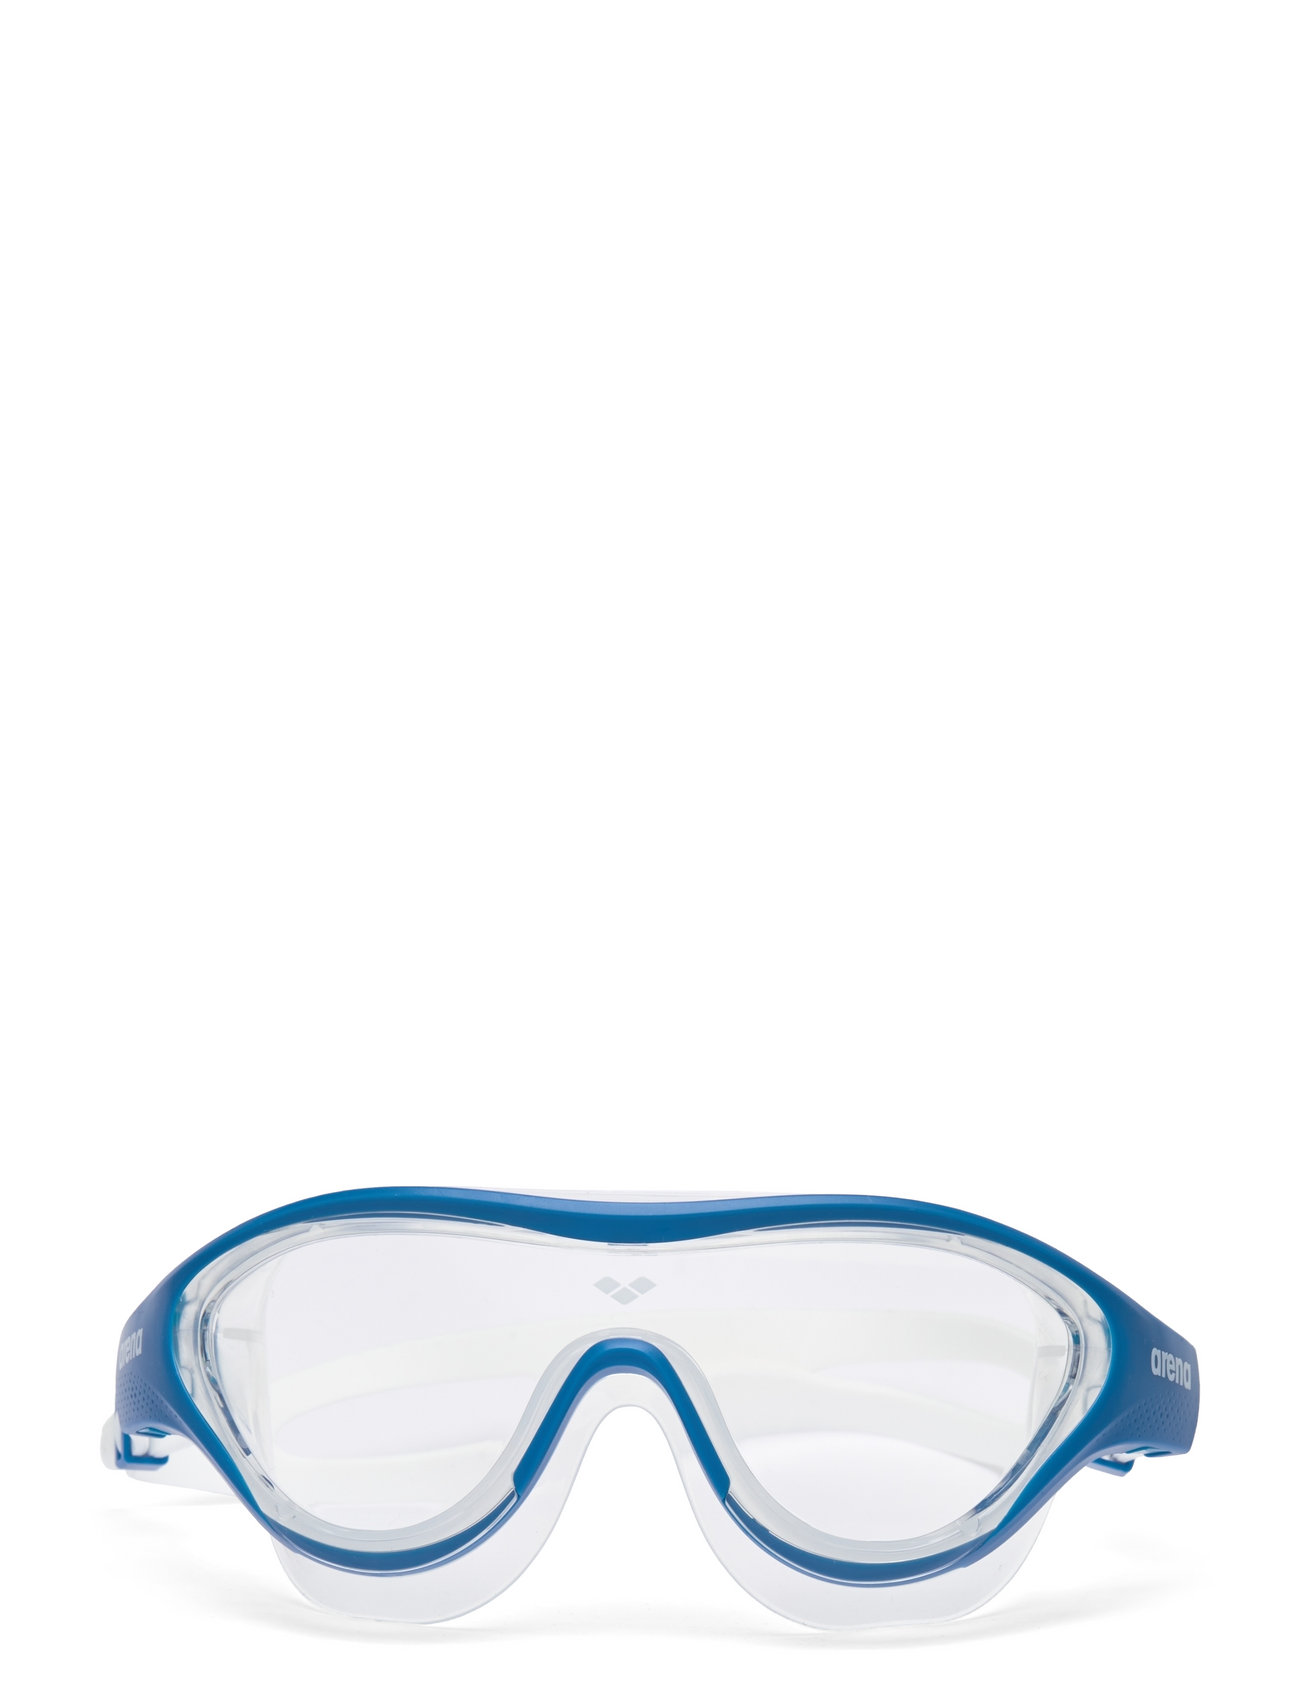 The Mask Sport Sports Equipment Swimming Accessories Blue Arena